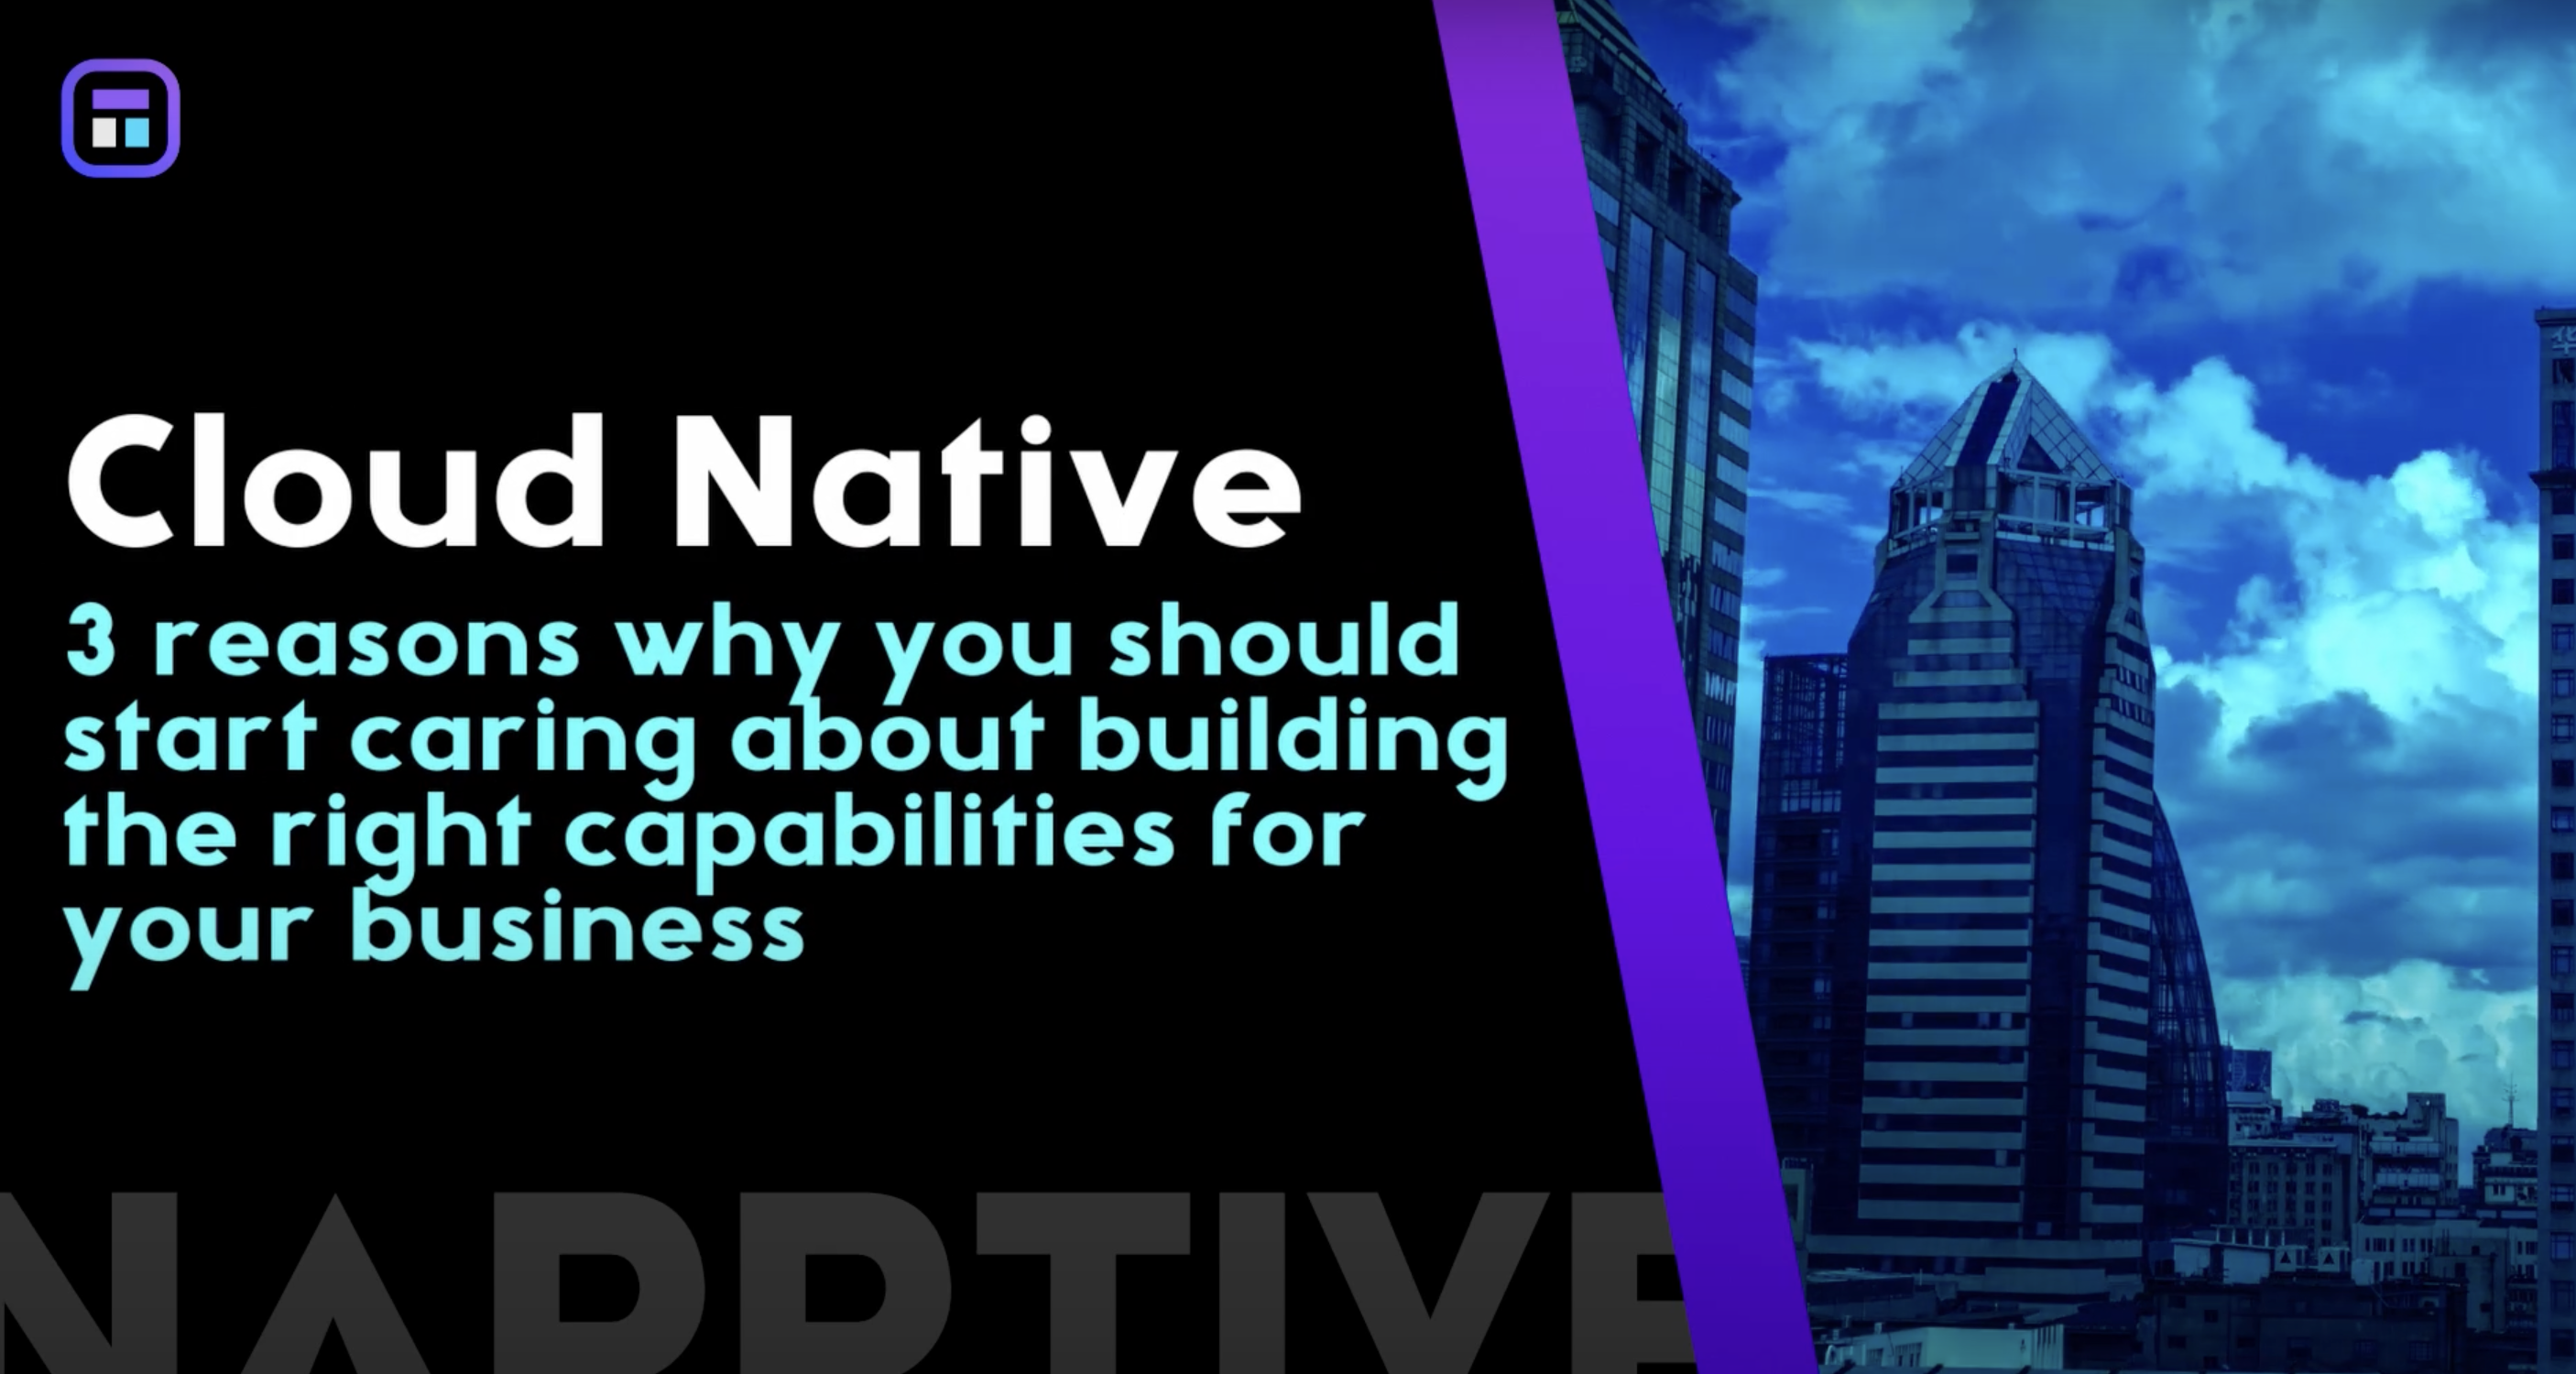 Cloud Native - 3 reasons start caring about it